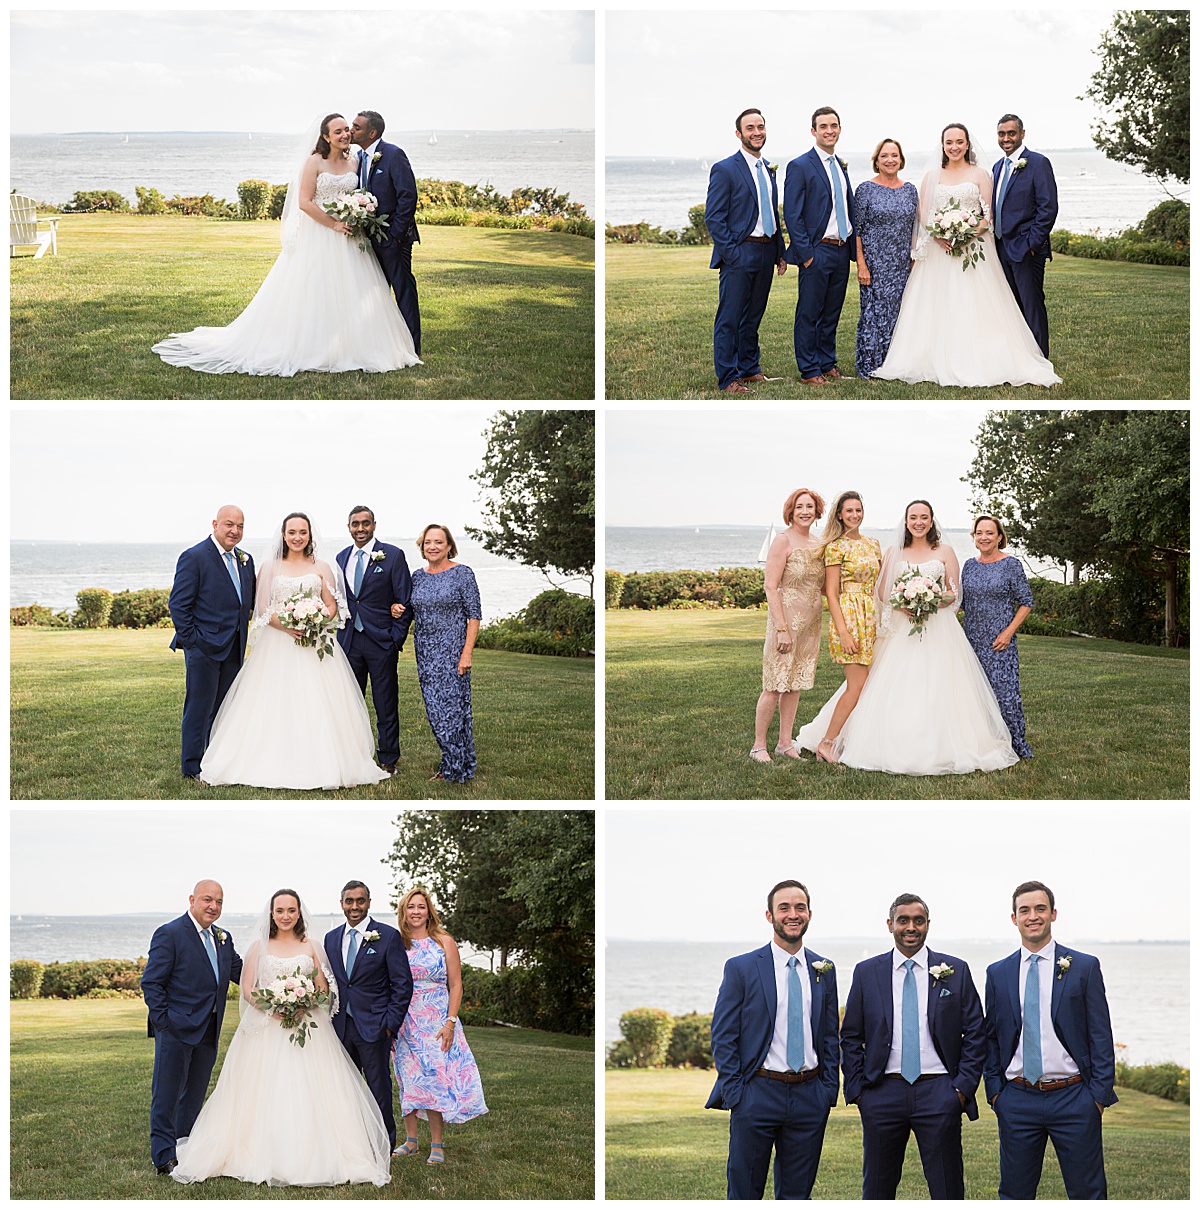 Family portraits are taken on the lawn overlooking the ocean at this Warwick RI Wedding.  